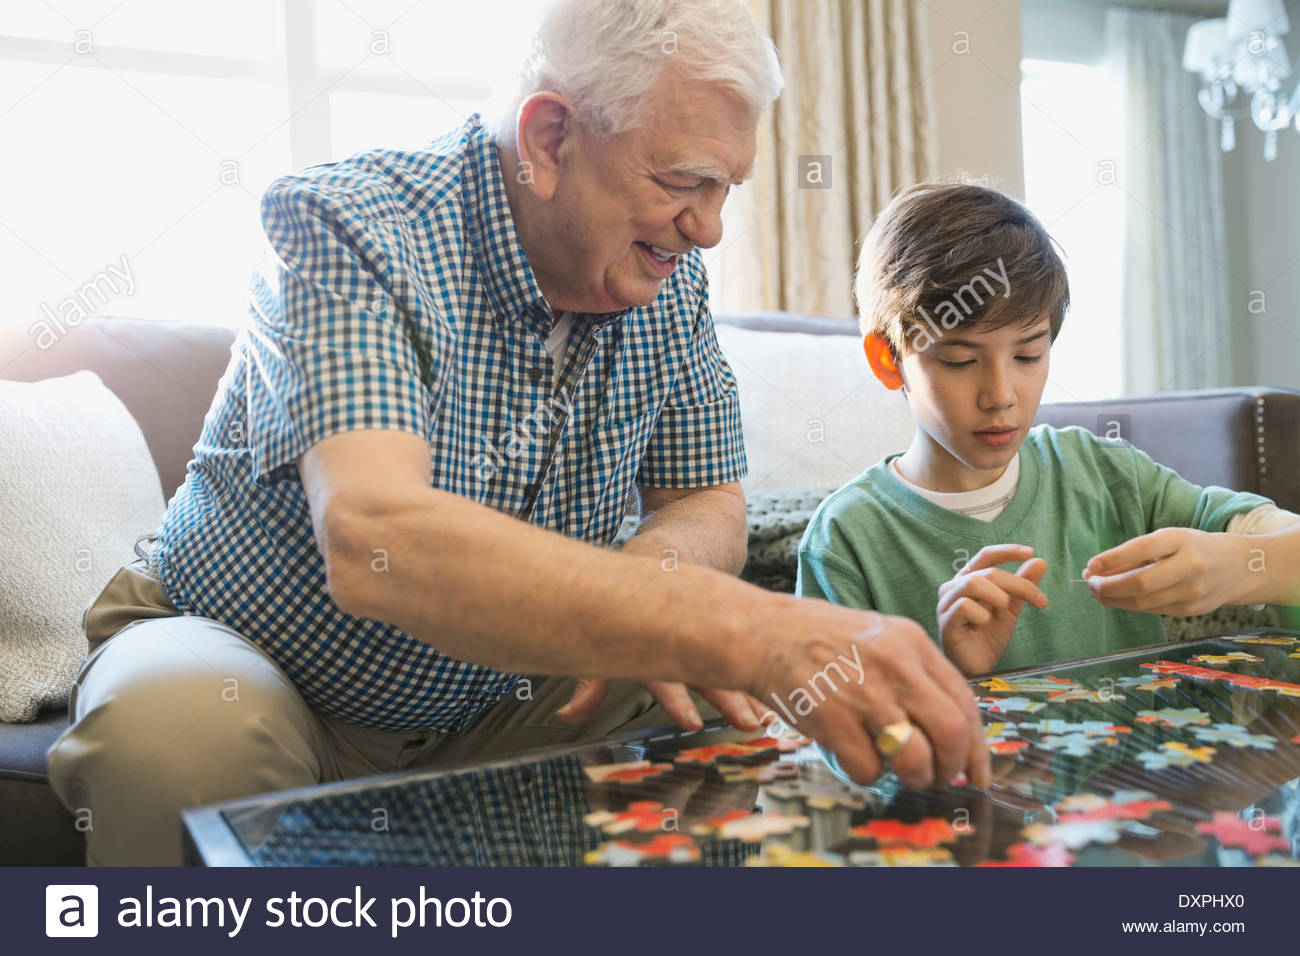 Grandfather and grandson solving puzzle at table Stock Photo